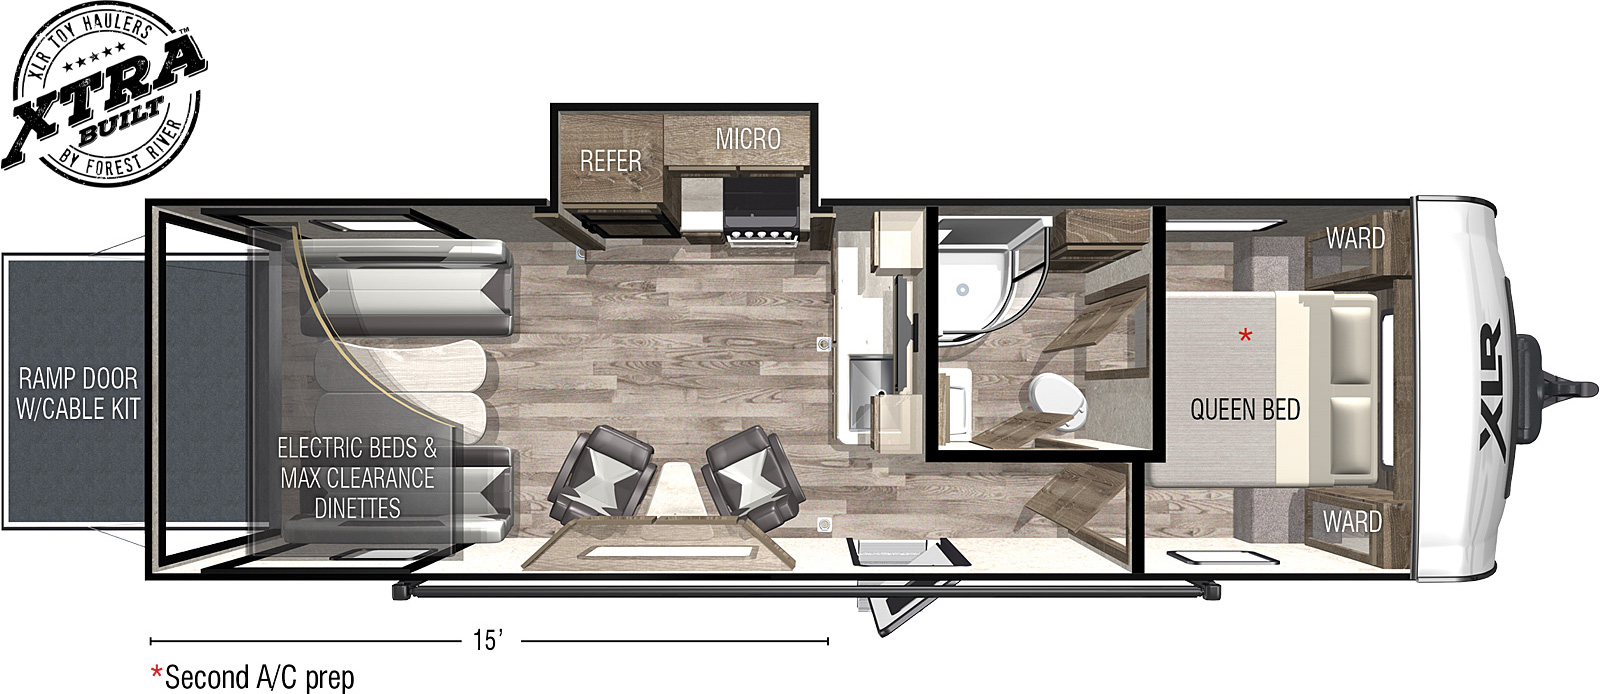 XLR Hyperlite 2815 floorplan. The 2815 has one slide out and one entry door.